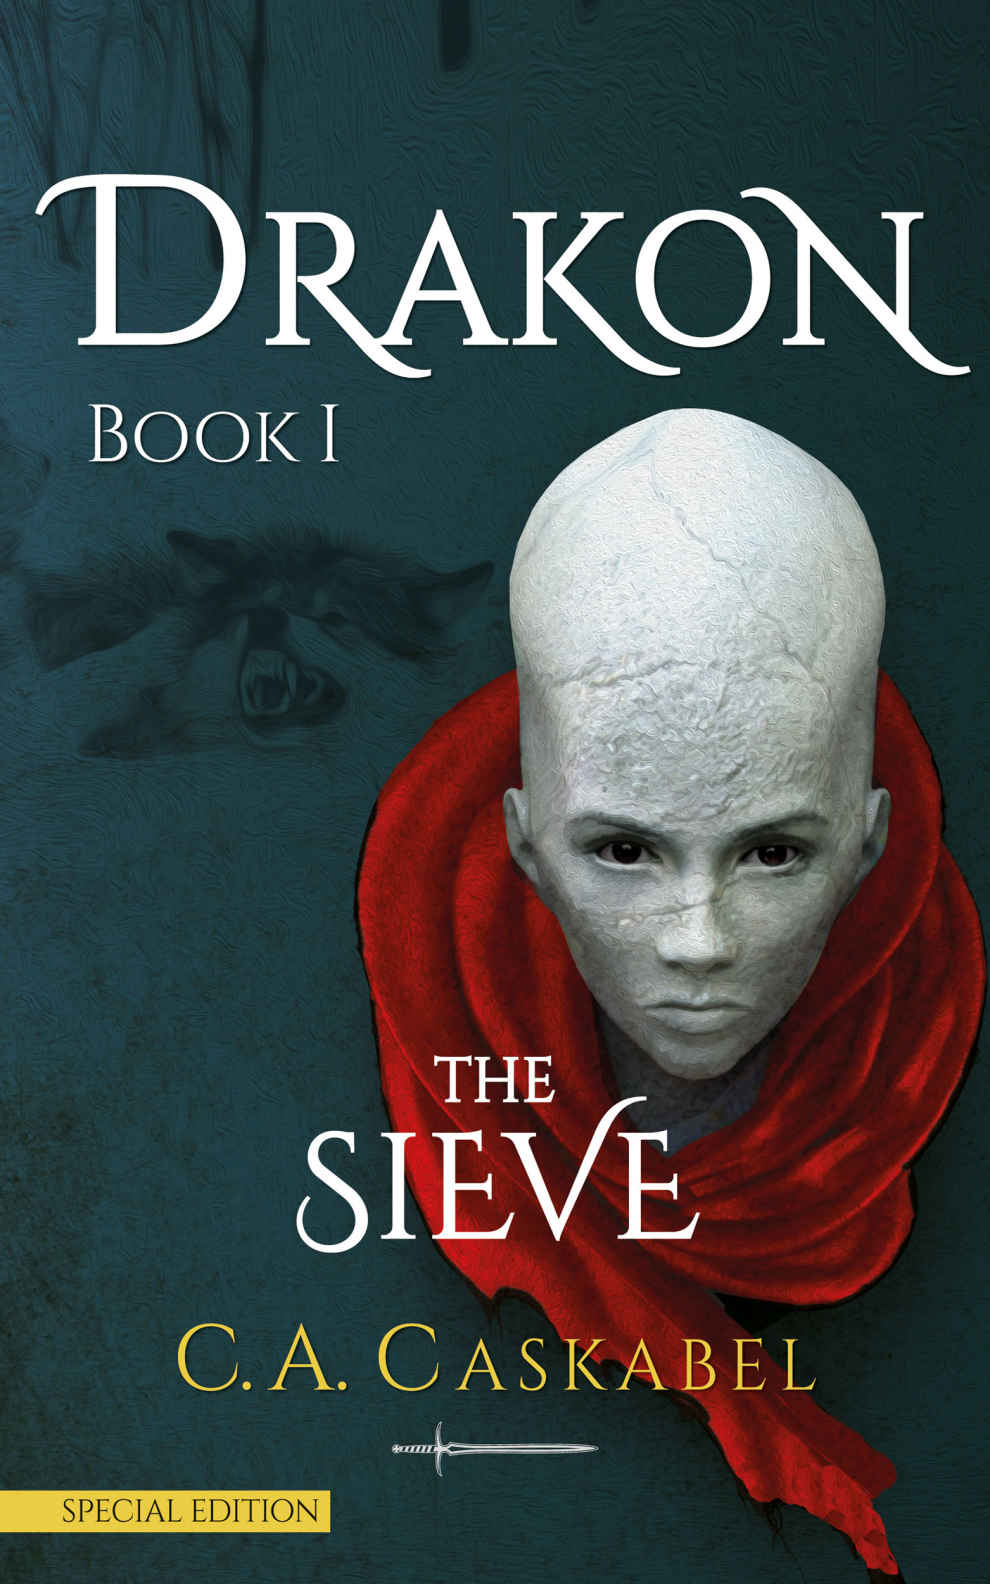 FREE: Drakon Book I: The Sieve by C.A. Caskabel